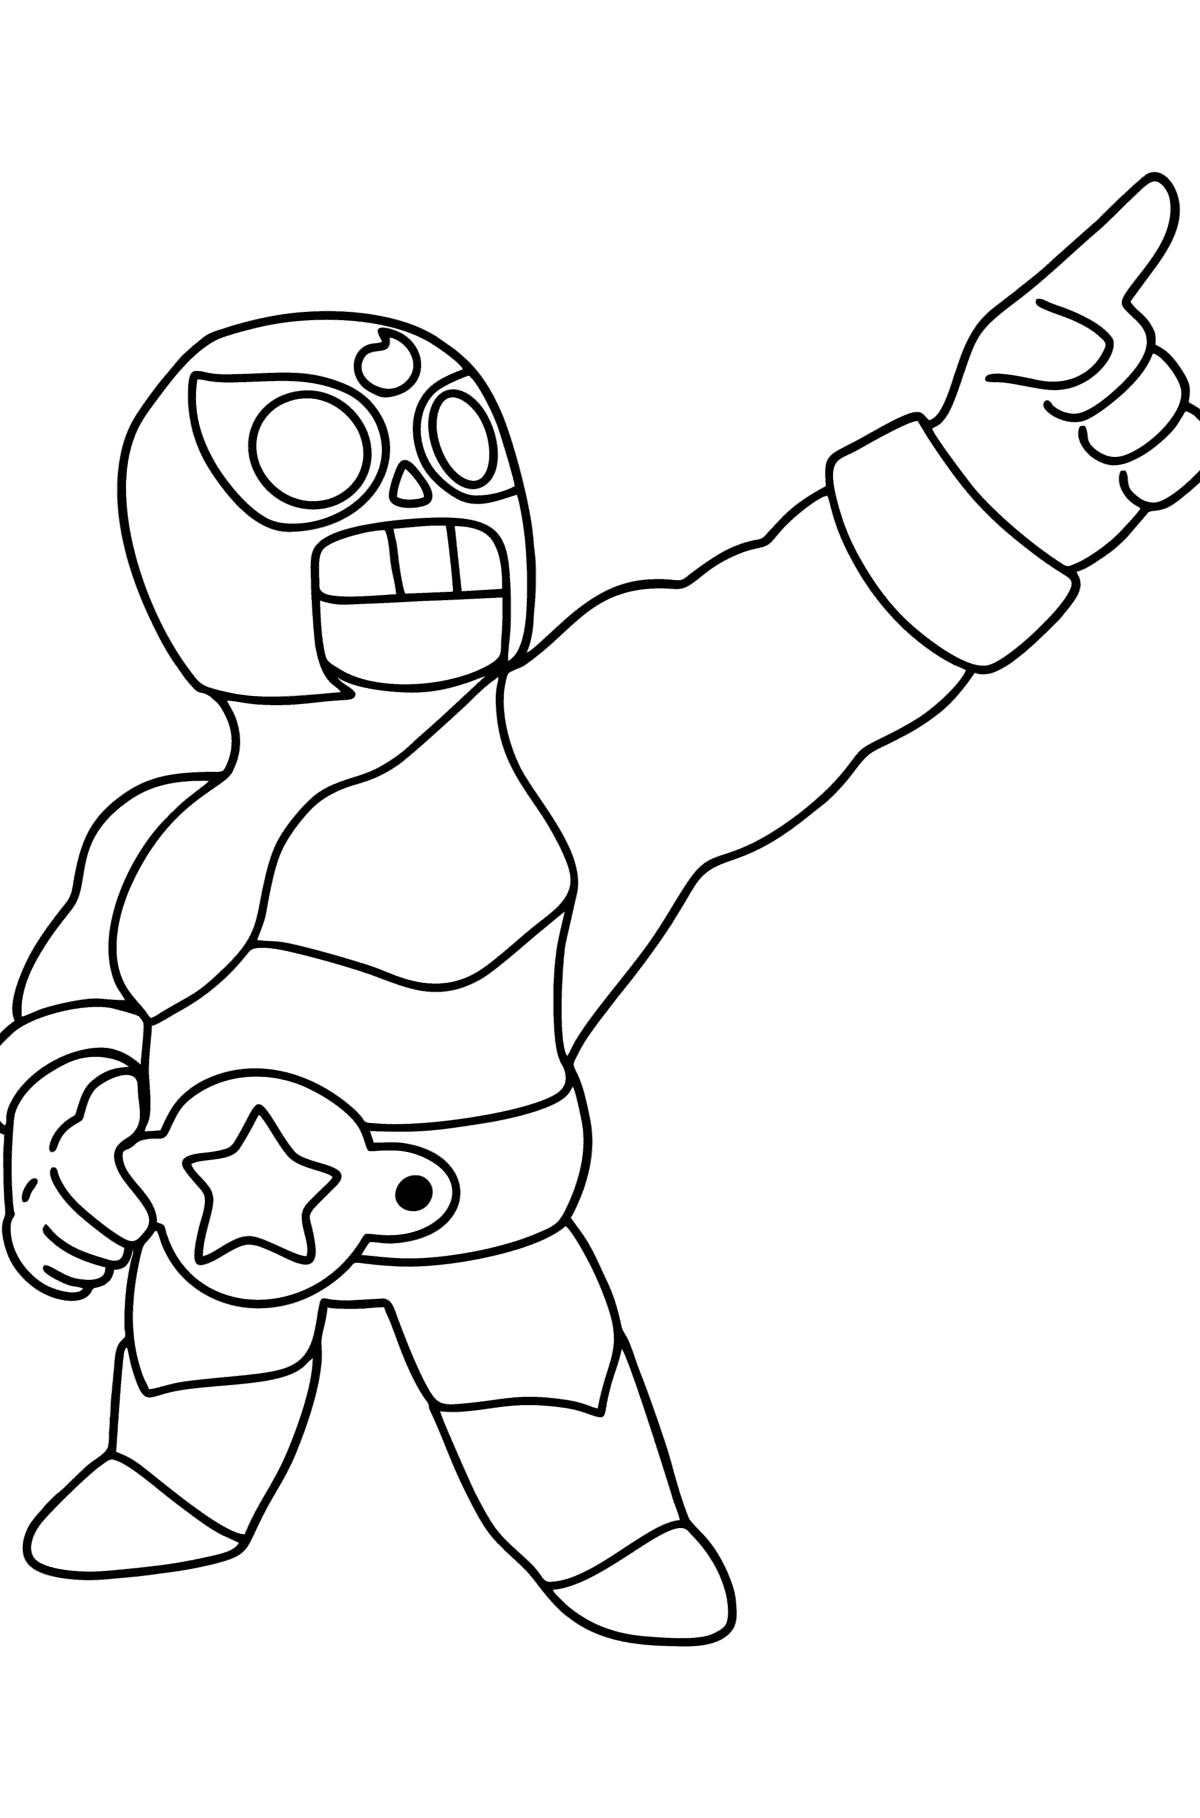 Brawl Stars El Primo coloring page - Coloring Pages for Kids